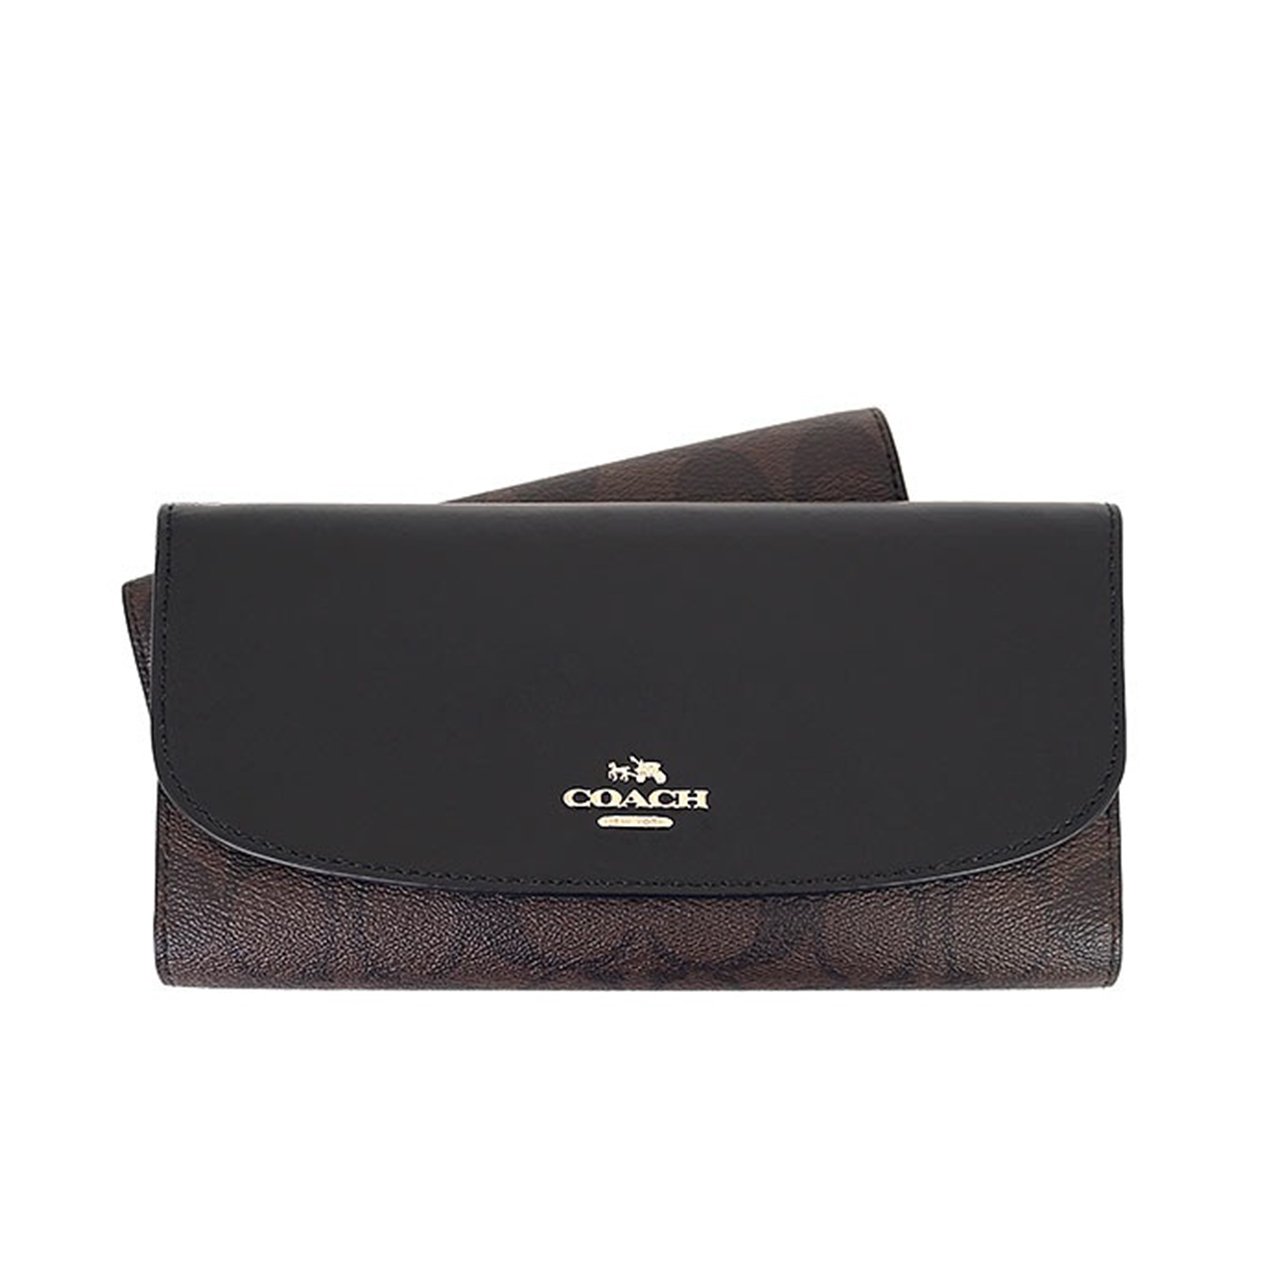 New Coach CheckBook Long Wallet in Black/Mahogany GHW